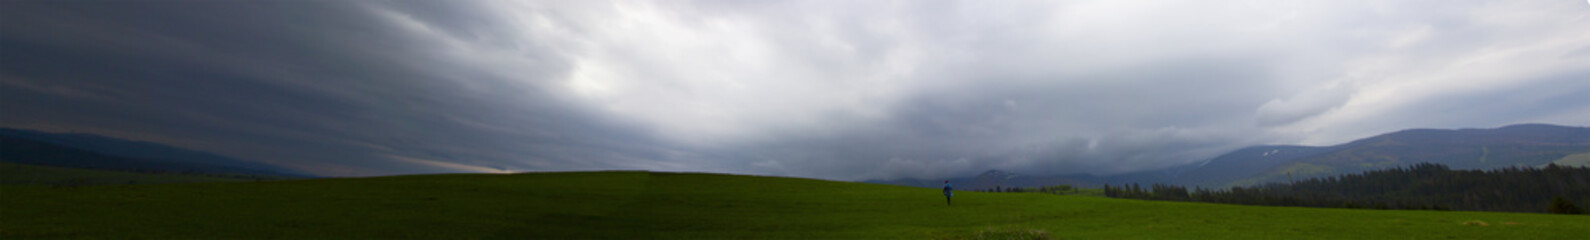 Panorama in the mountains in cloudy weather, a lonely man turned his back